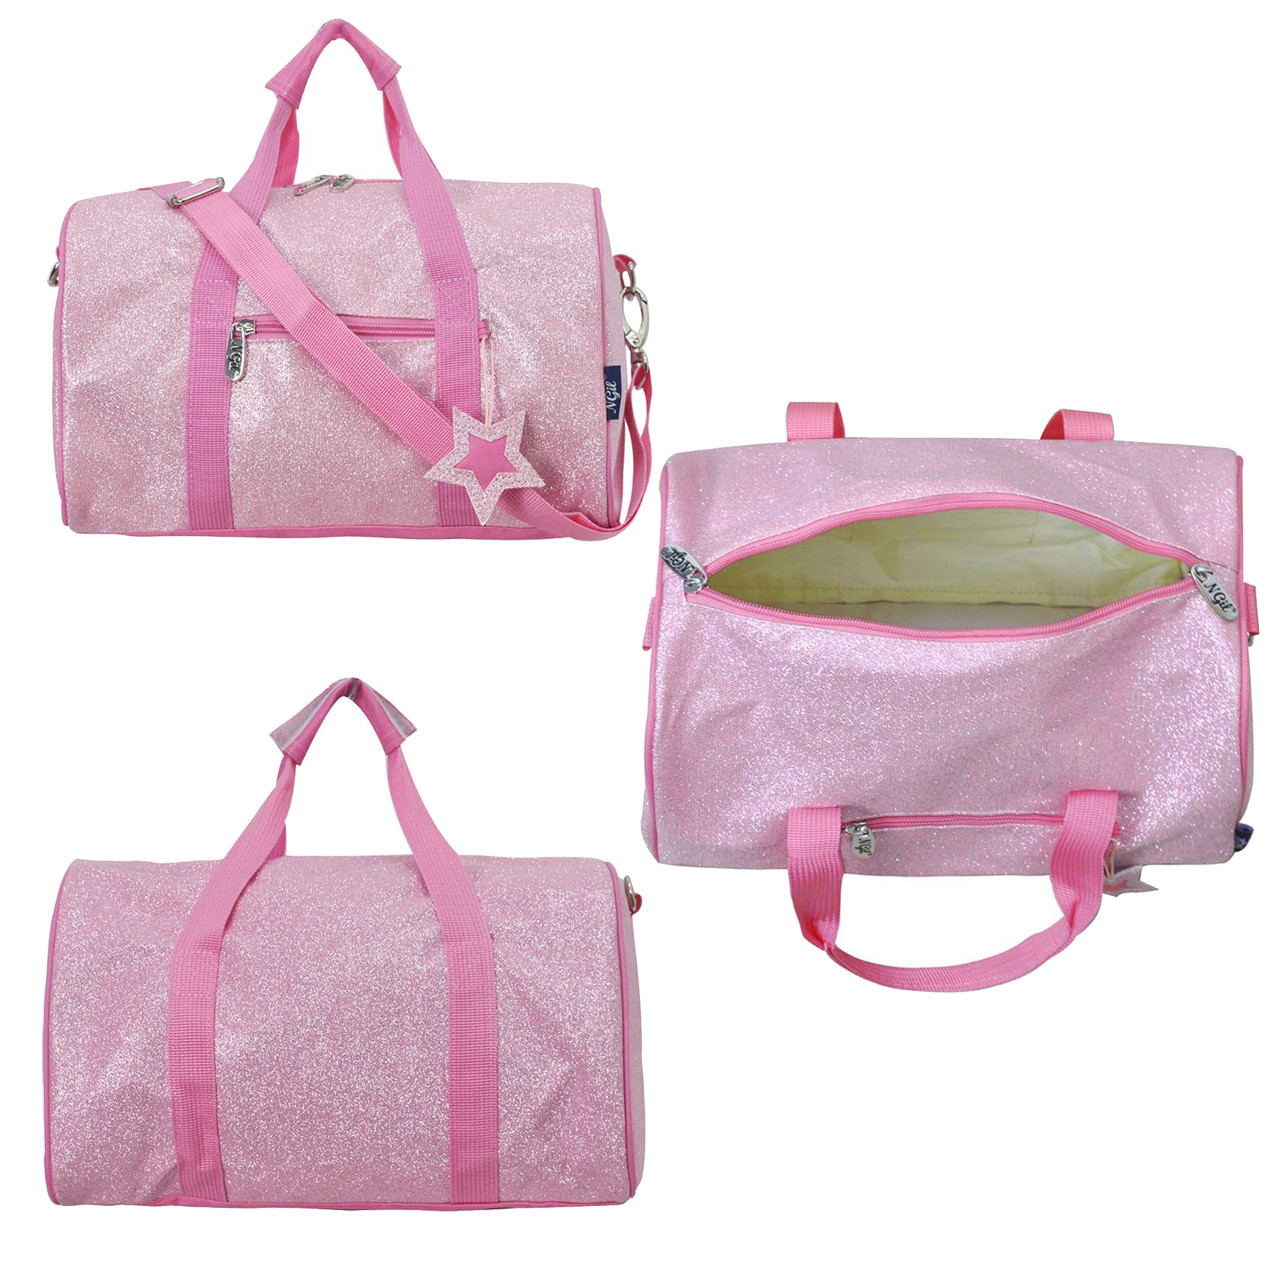 Glitter n' Dance Holographic Pink Duffle – Olly-Olly